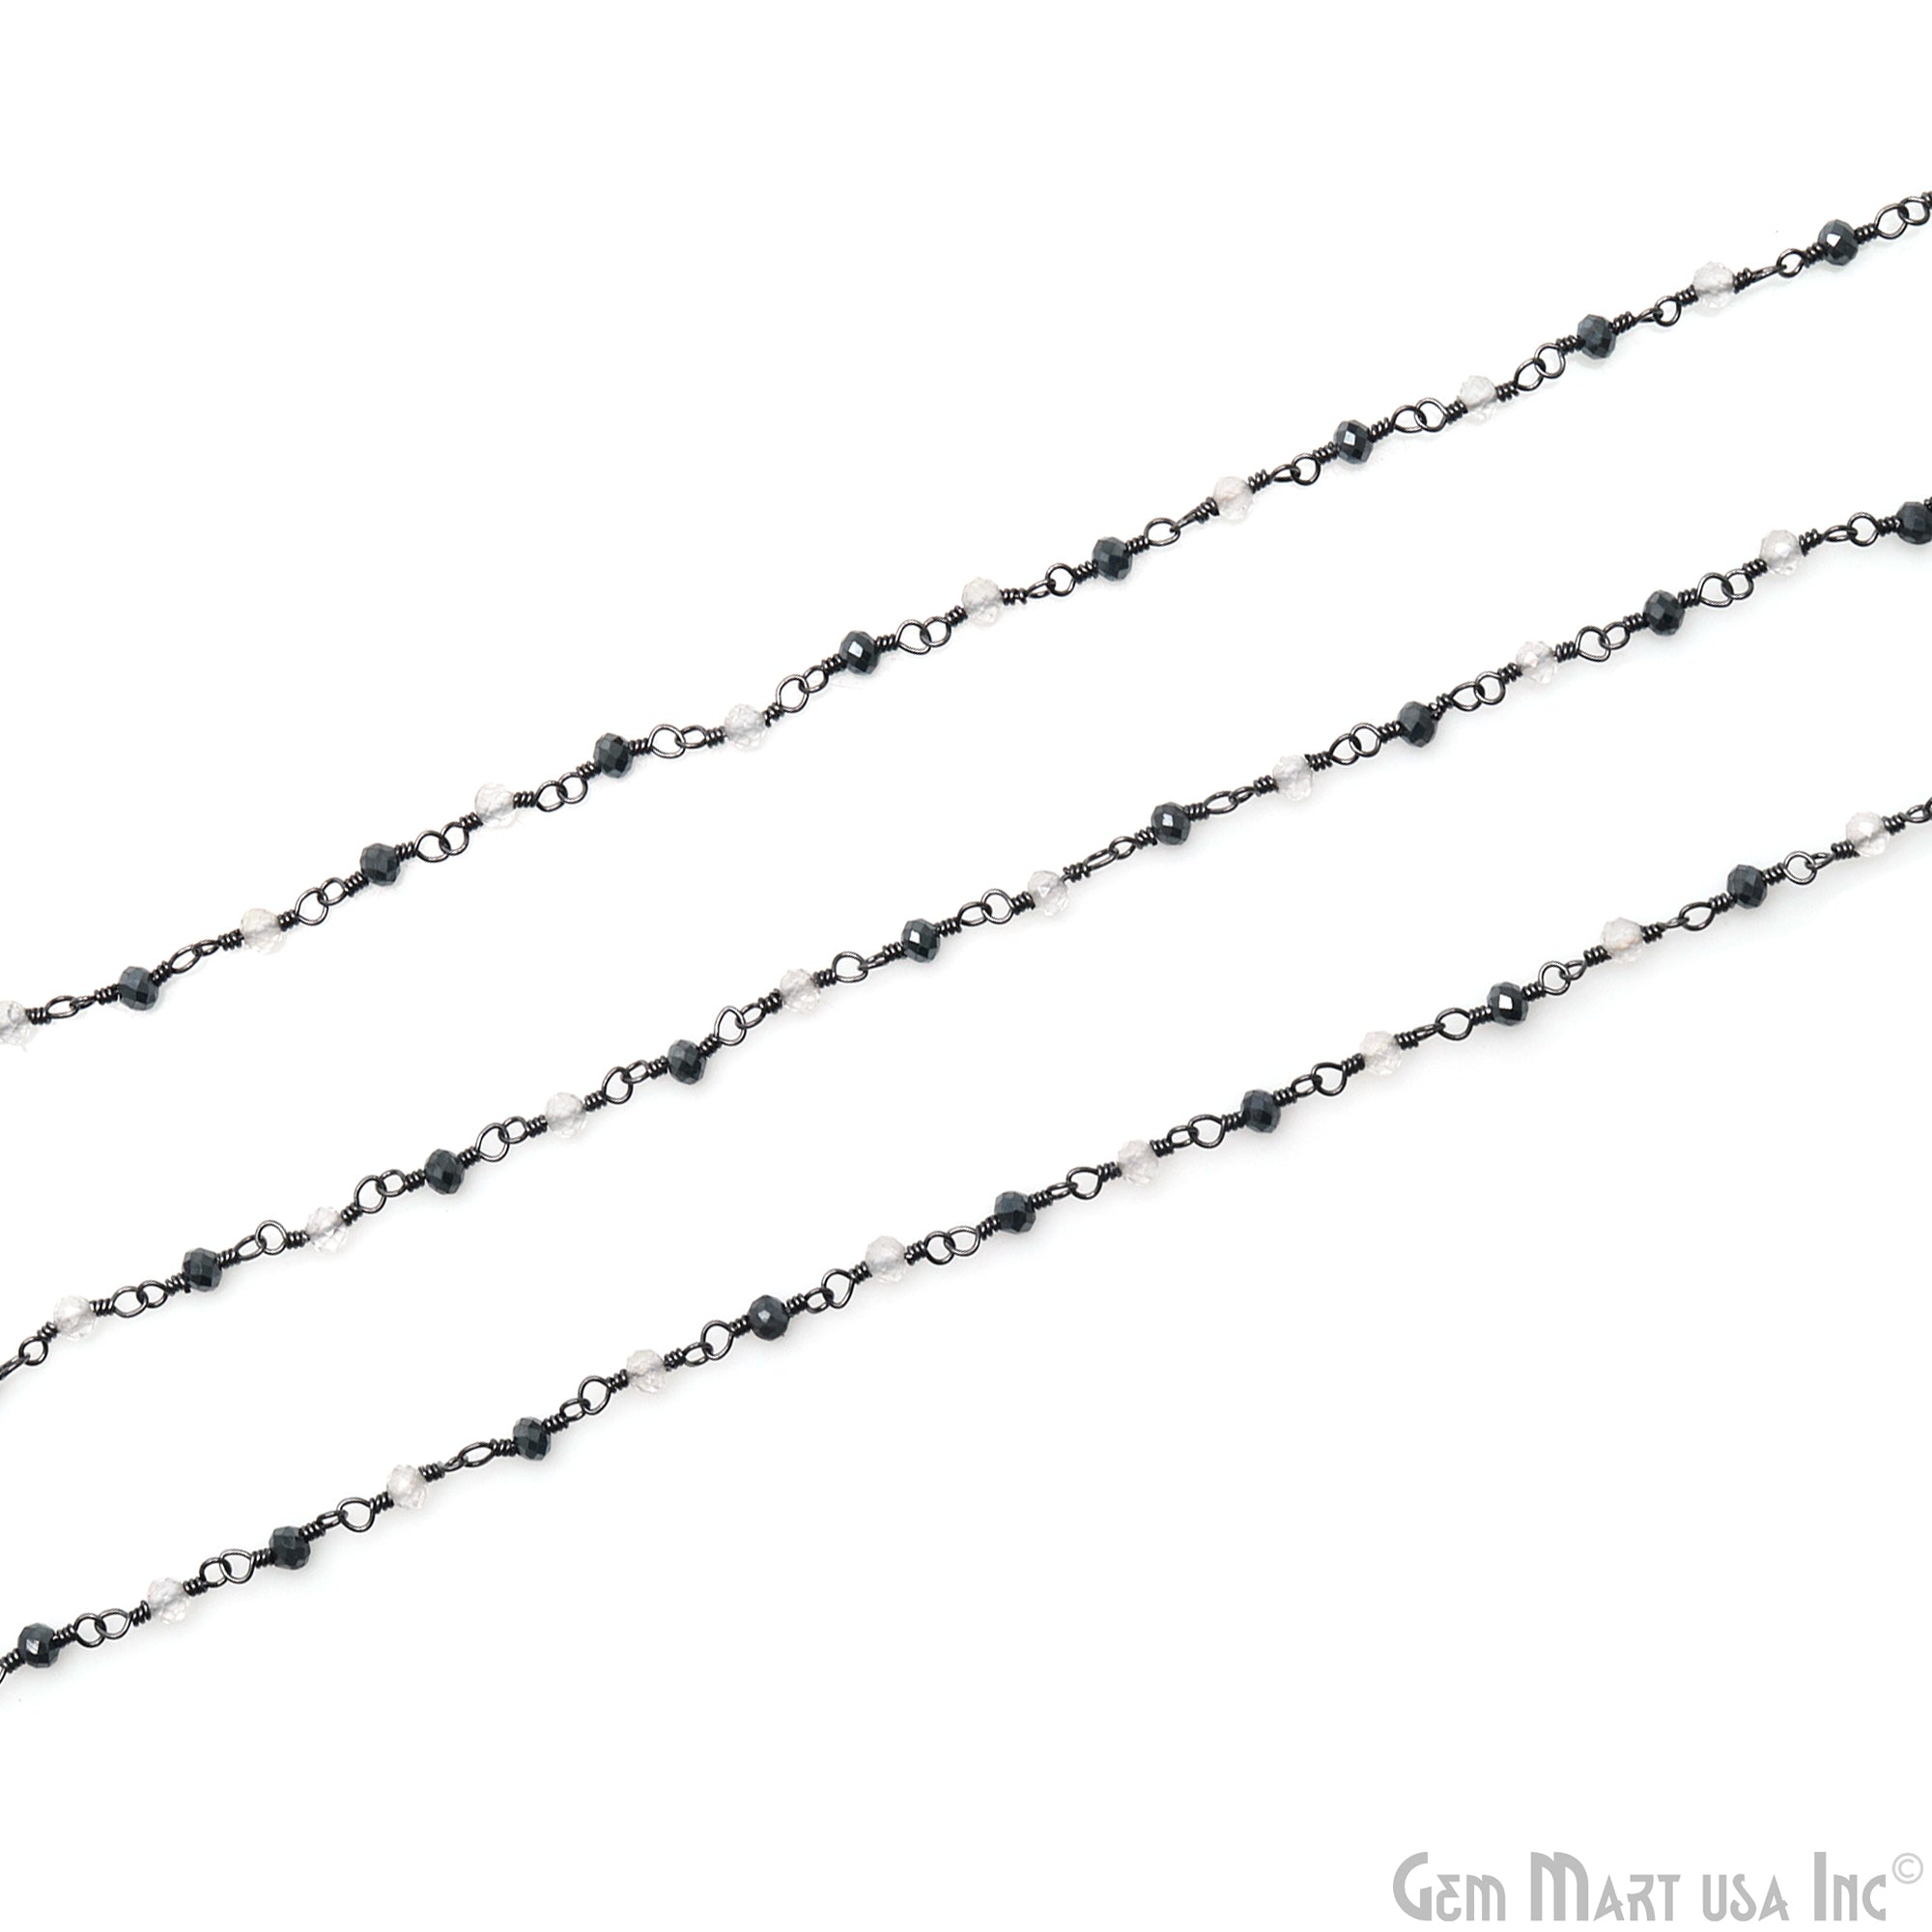 Black Pyrite & Crystal 2-2.5mm Oxidized Wire Wrapped Gemstone Beads Rosary Chain